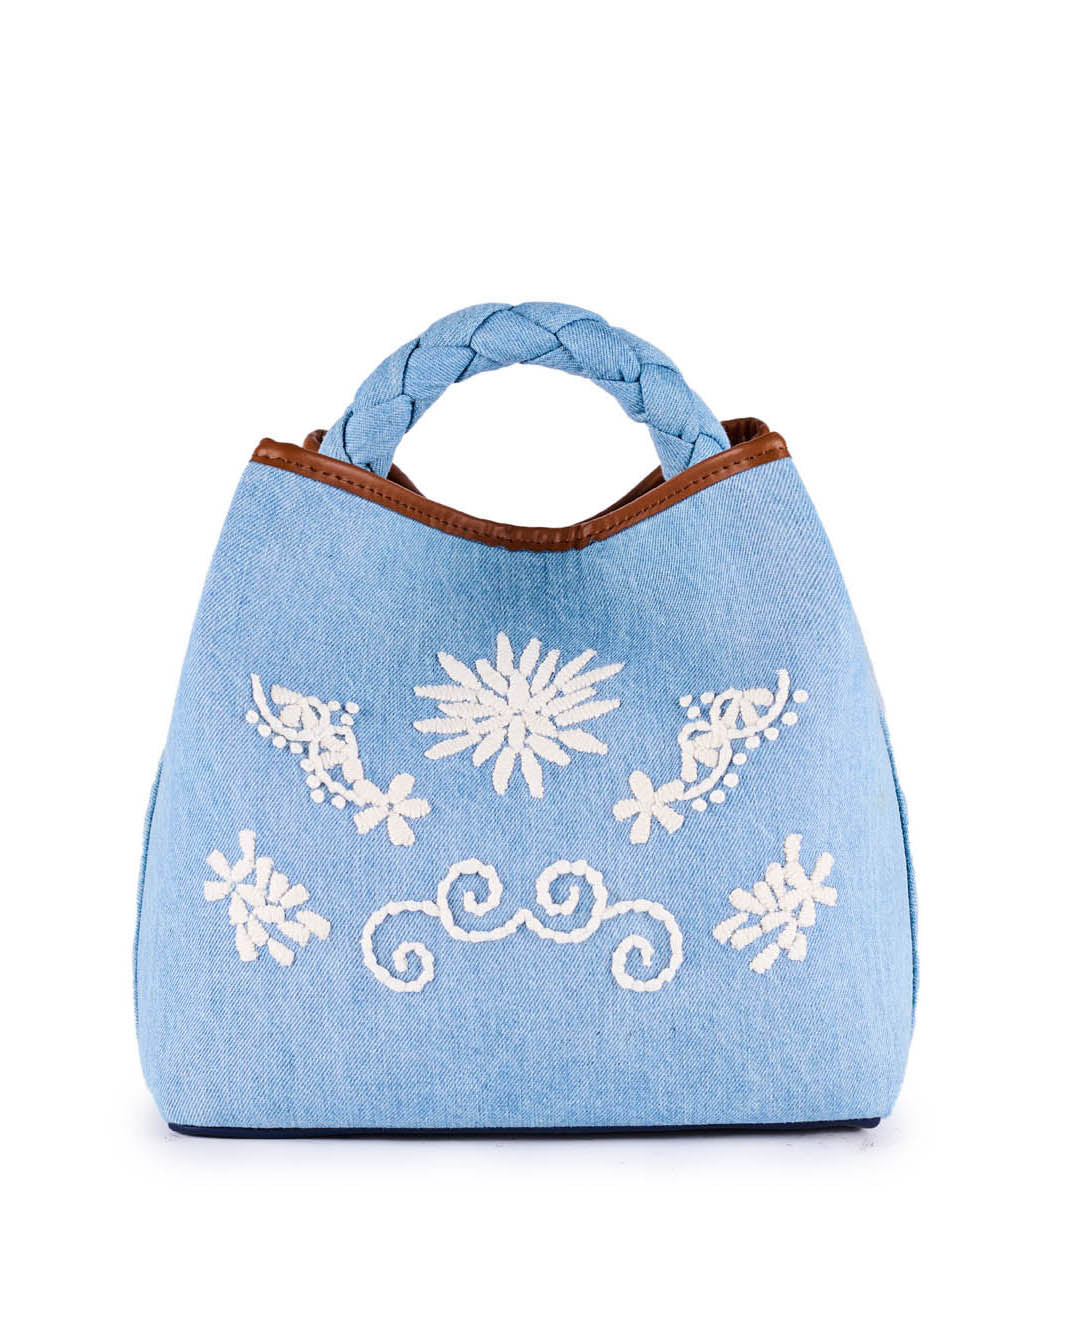 Light blue denim tote bag with floral embroidery and braided handle